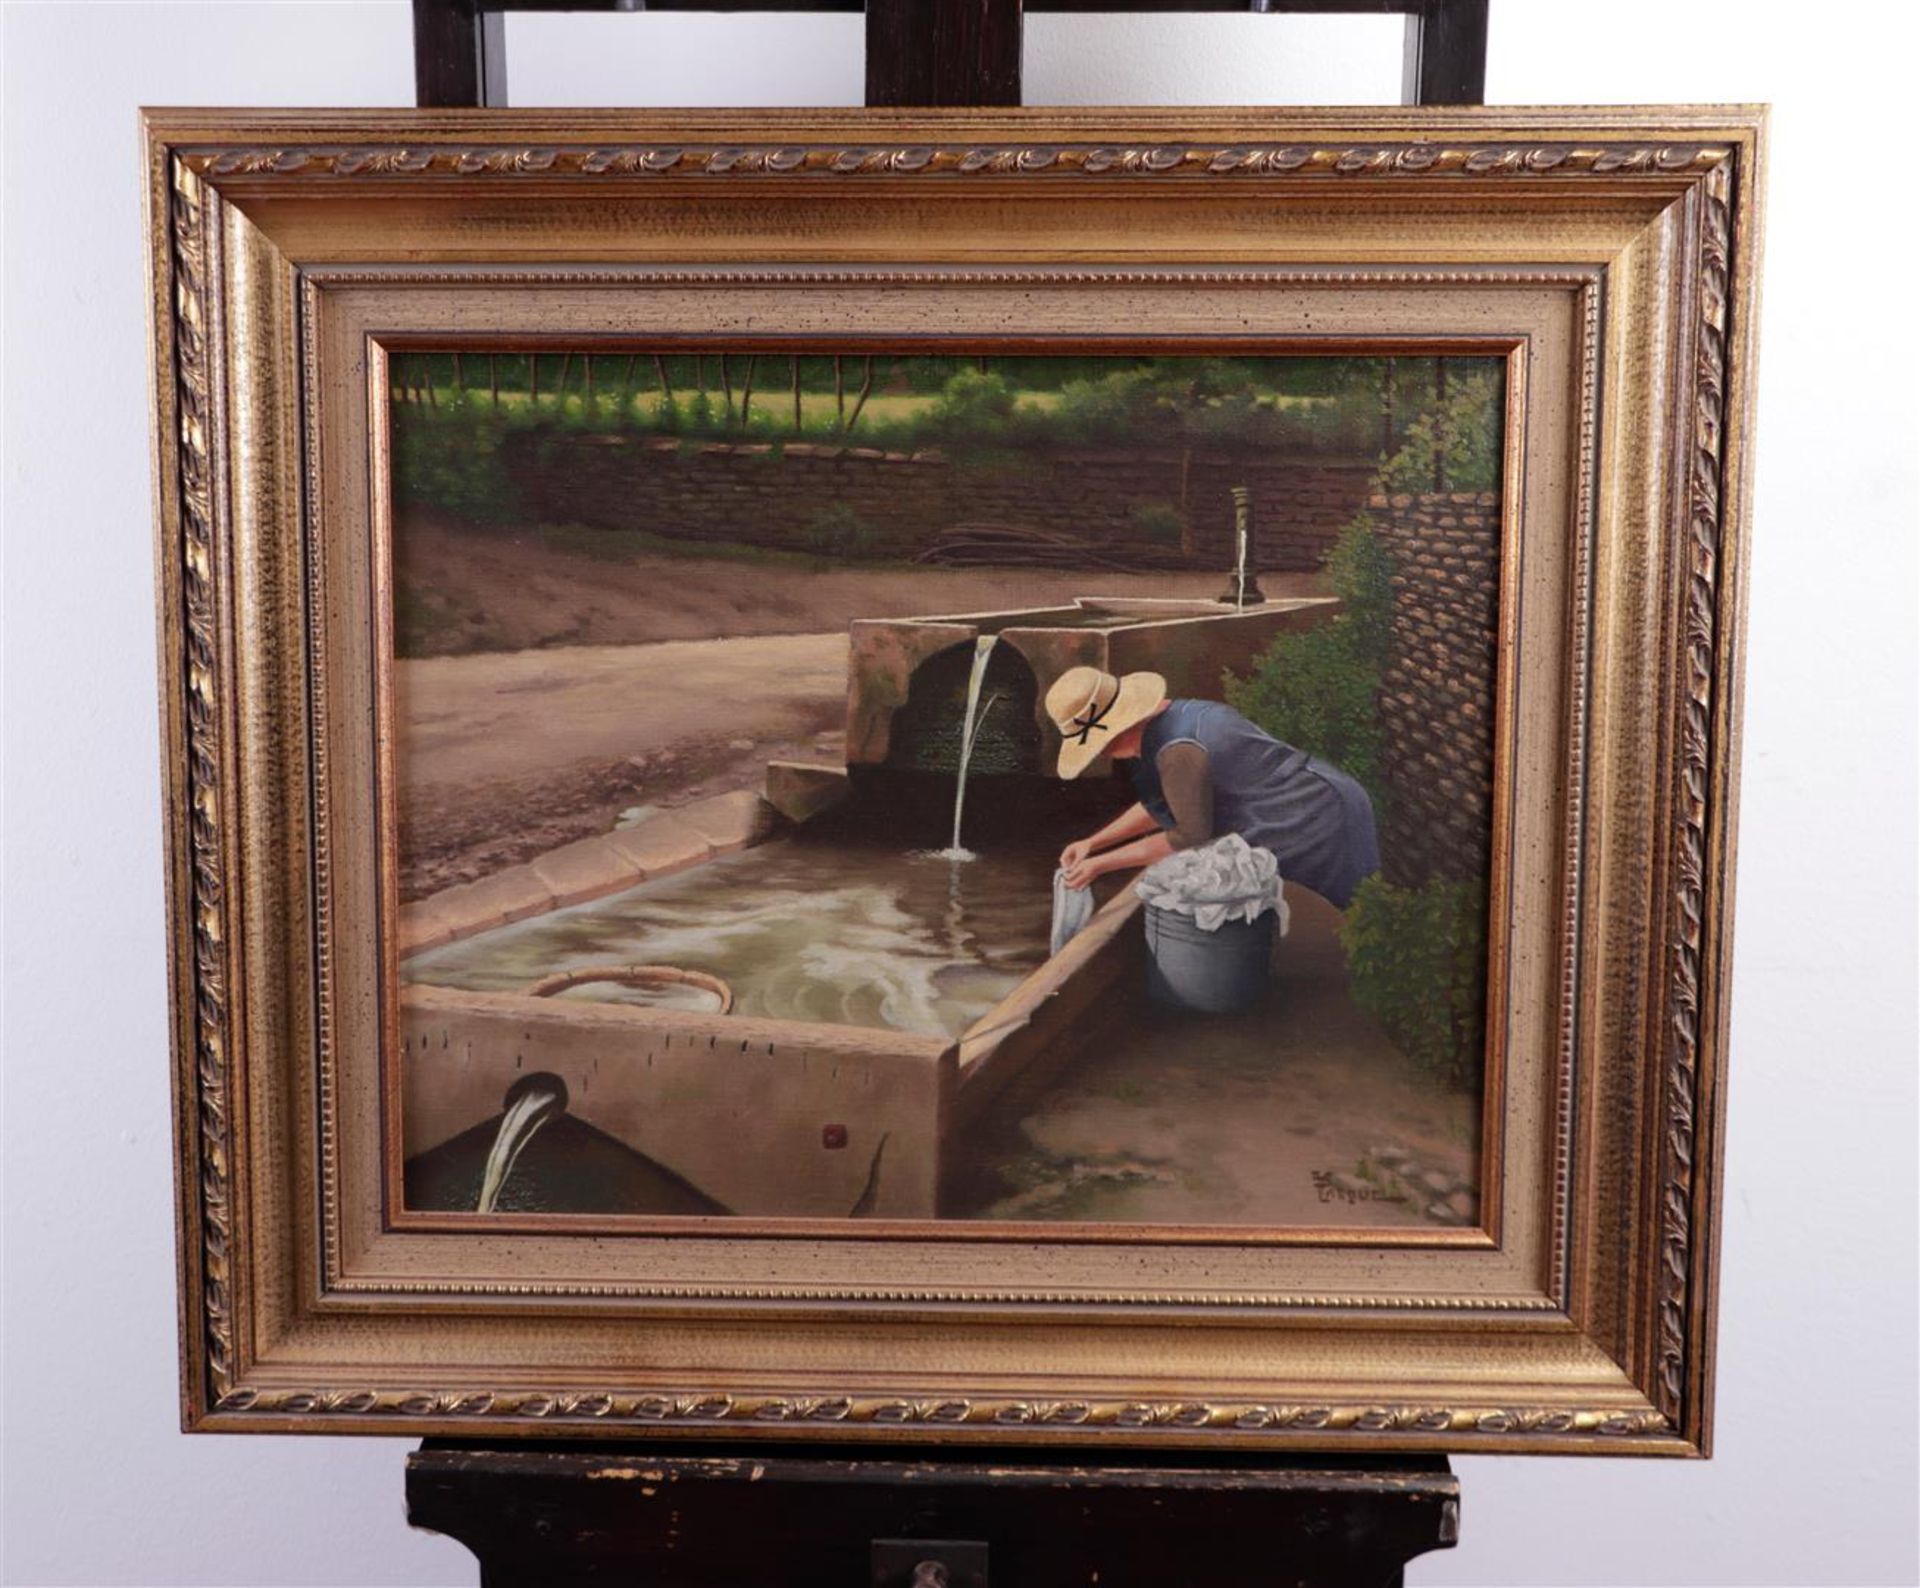 French School, 20th century, Woman at washing place, signed 'Pasque', oil on canvas,
40 x 50 cm. - Image 2 of 4